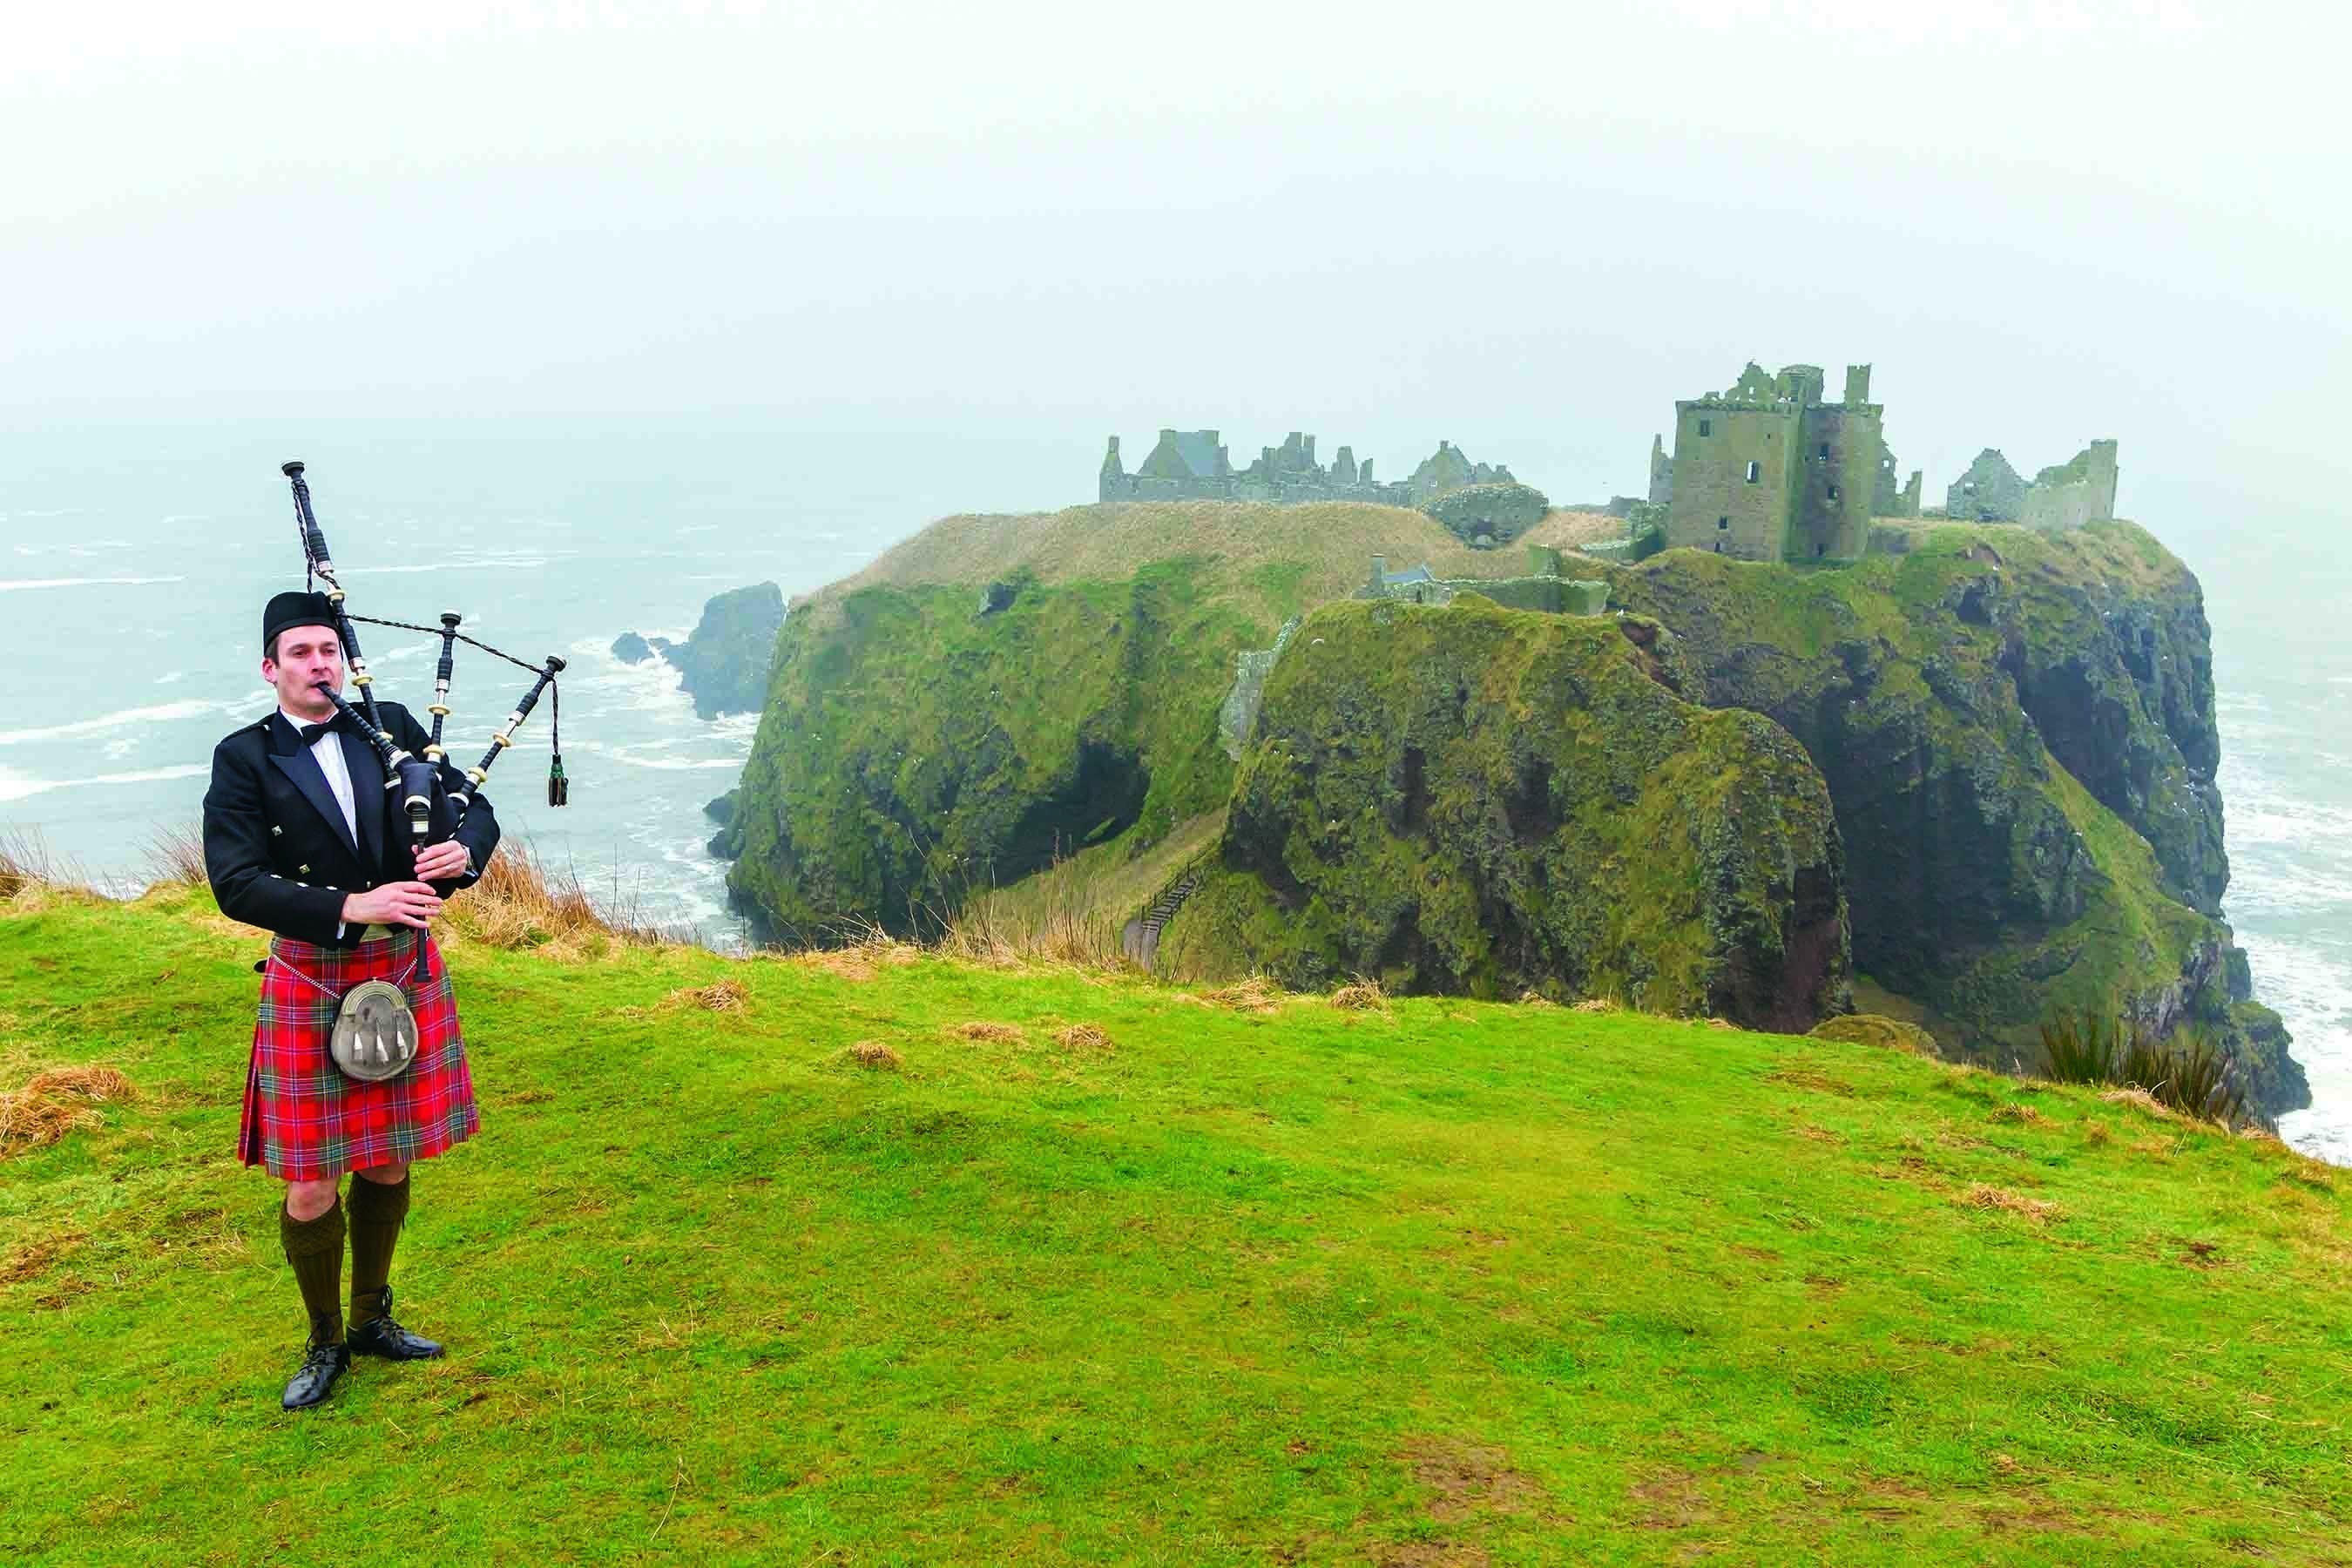 In summer 2016, Disney Cruise Line will debut a new 12-night itinerary to the British Isles, including new ports-of-call in England, Ireland, France and Scotland-where centuries-old castles set the scene for adventures ashore. (Disney Cruise Line)